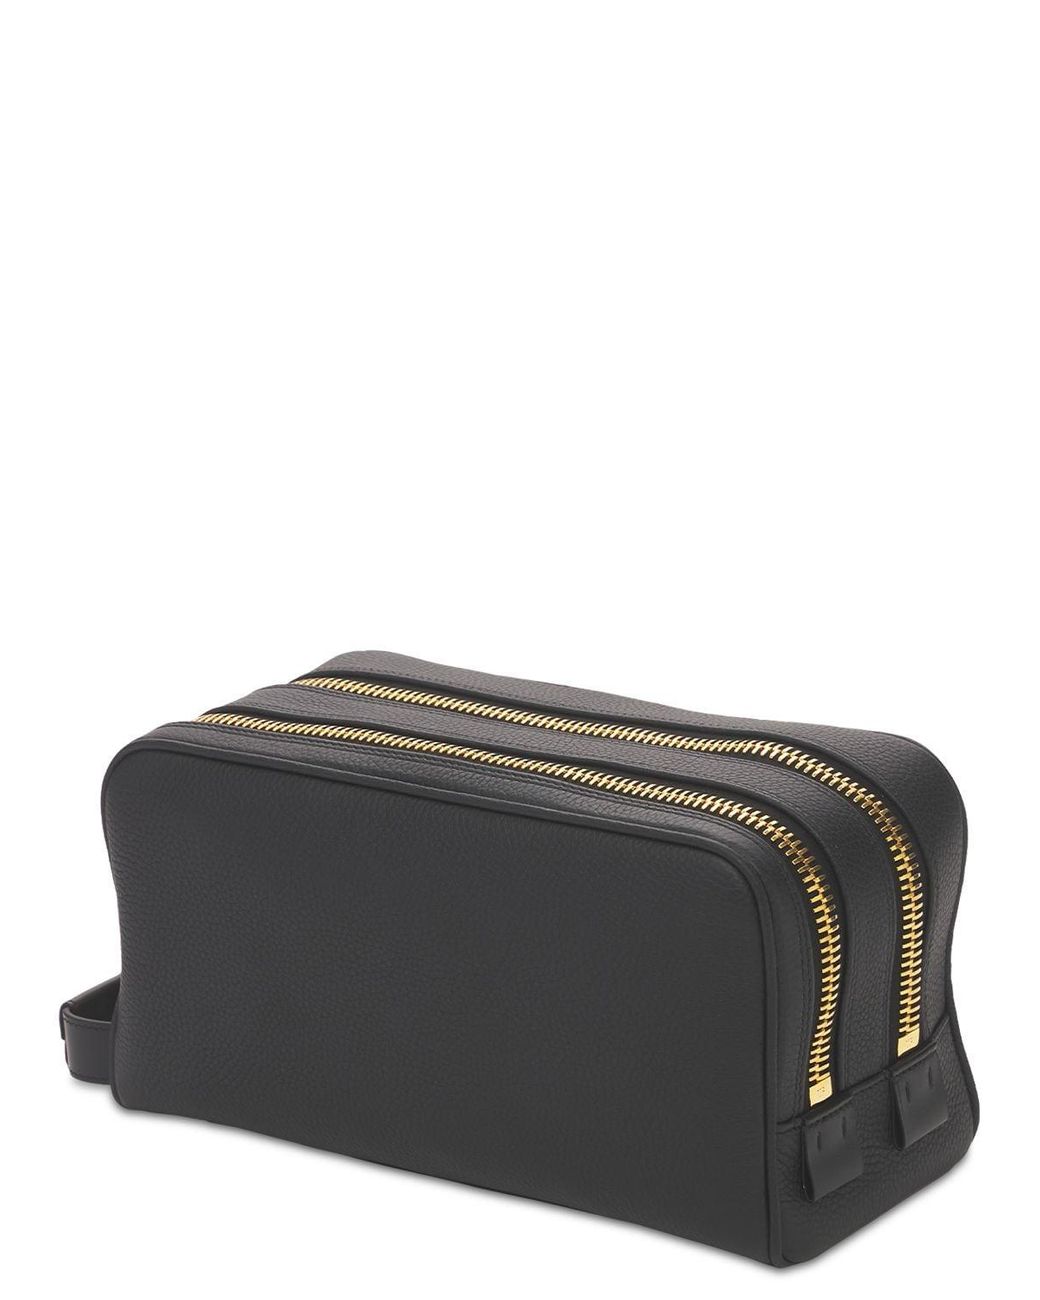 Tom Ford Leather Double Zip Toiletry Bag W/handle in Black for Men | Lyst